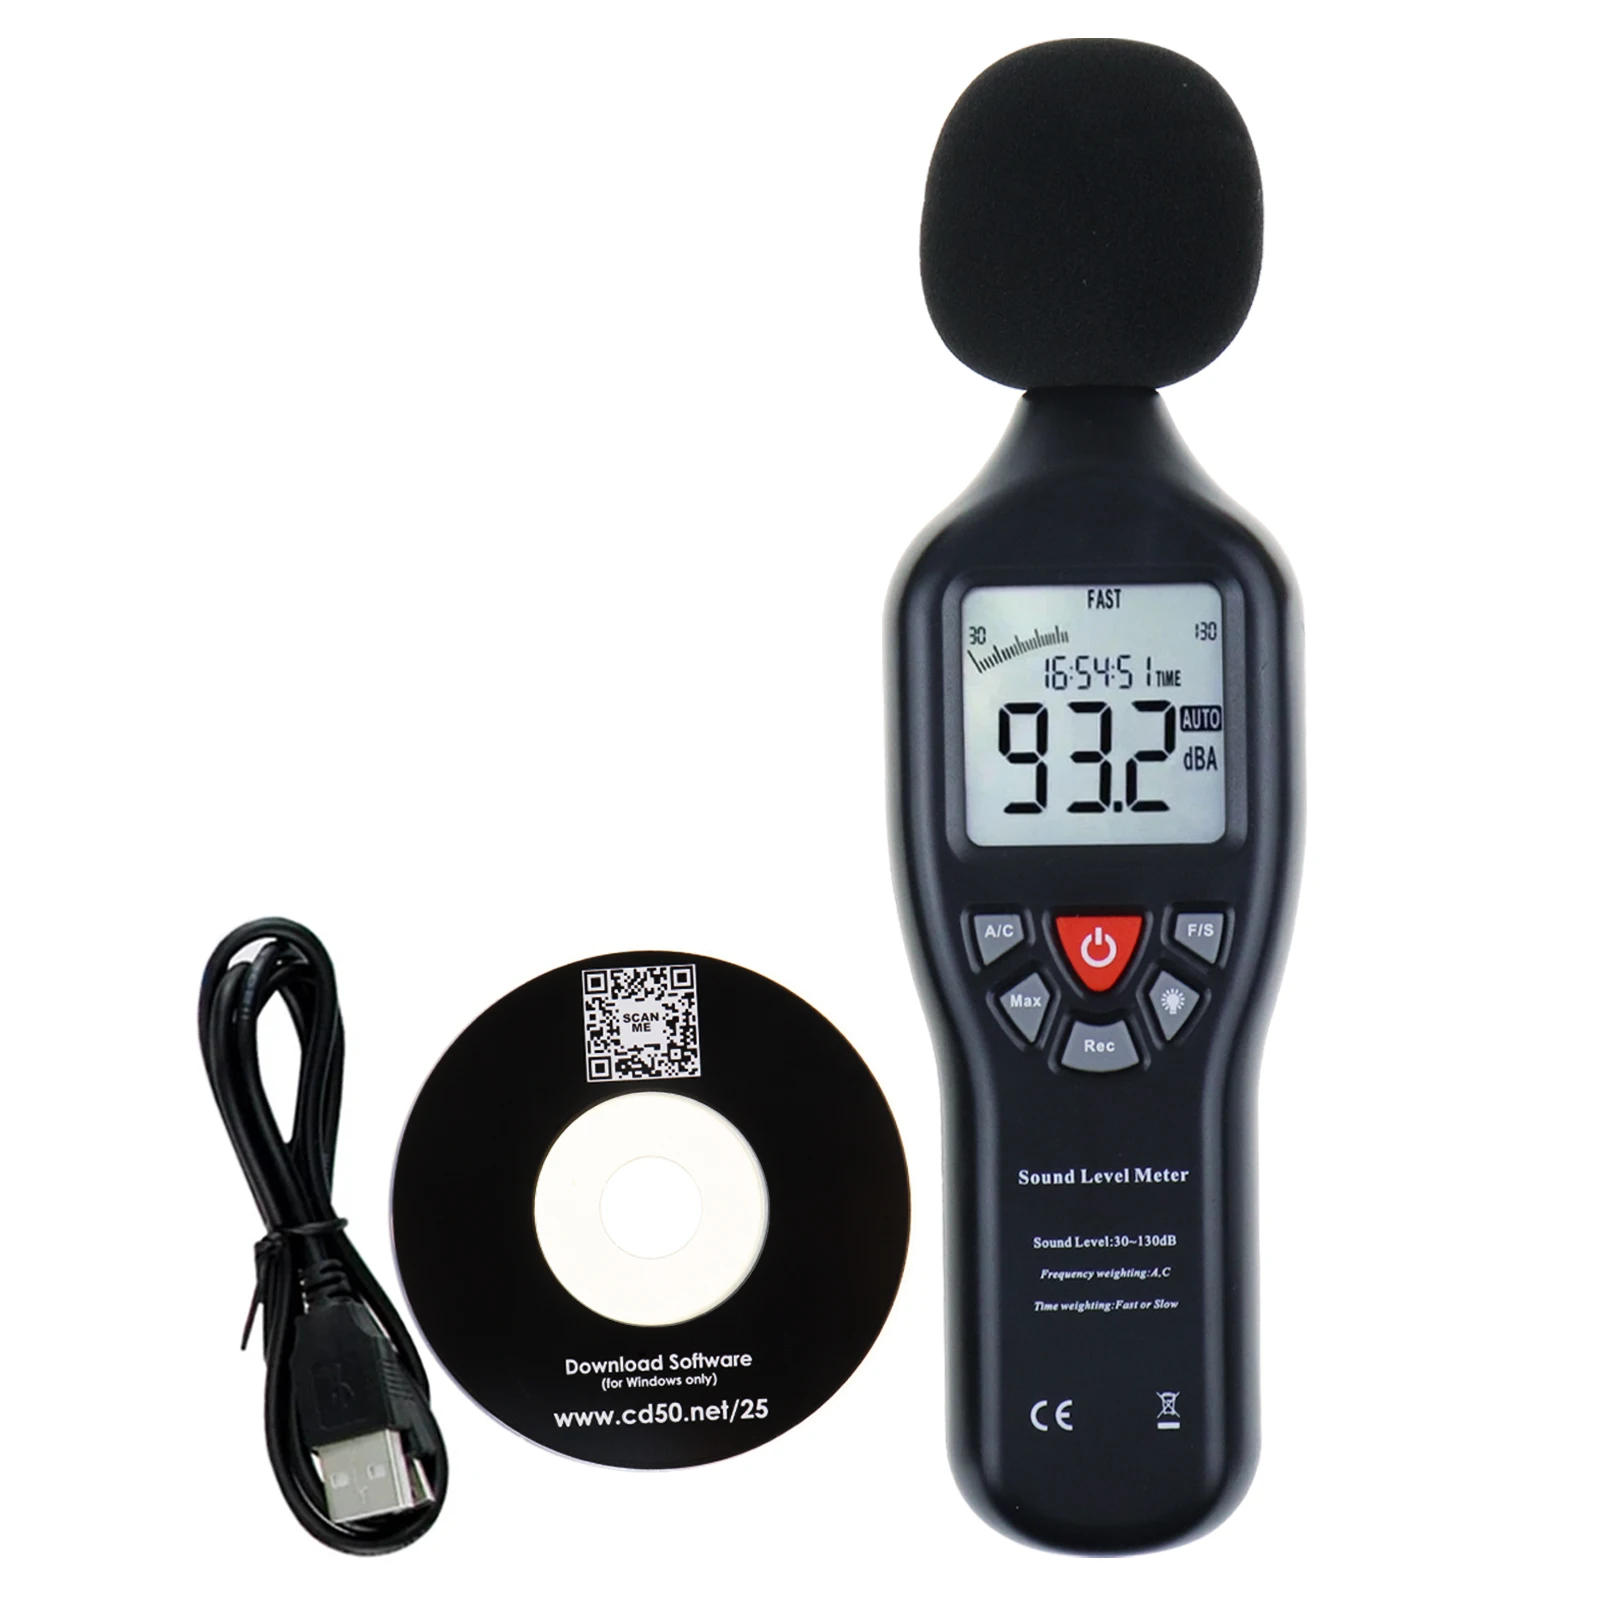 

High Accuracy Measuring 30dB-130dB with Data Record Function Sound Level Meter Backlit Display Compact Professional